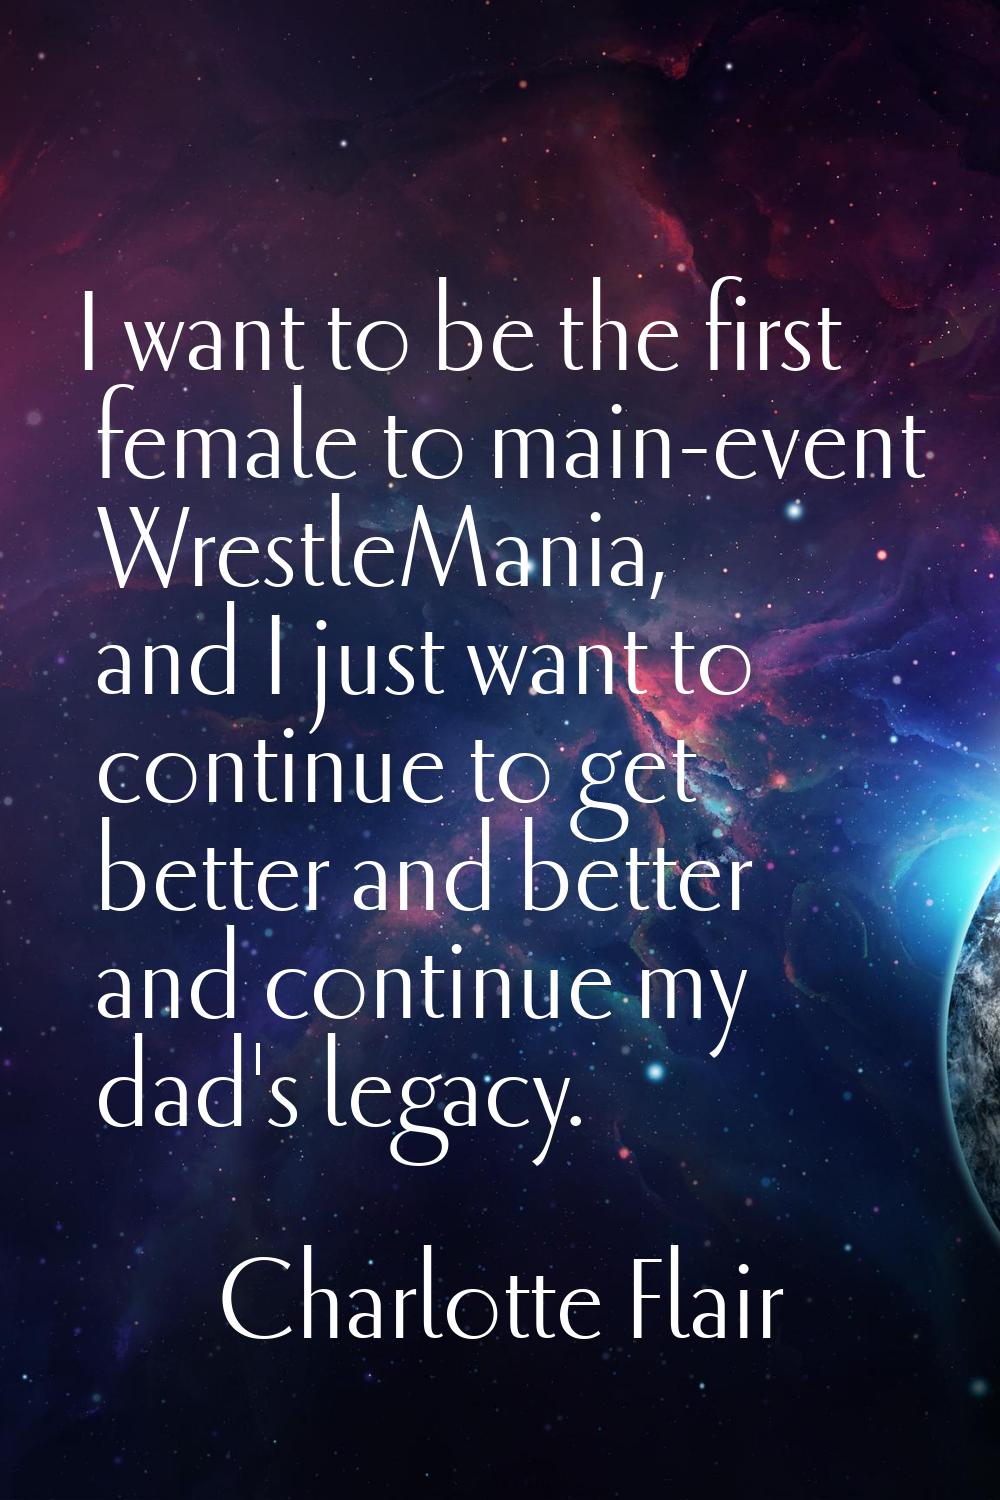 I want to be the first female to main-event WrestleMania, and I just want to continue to get better